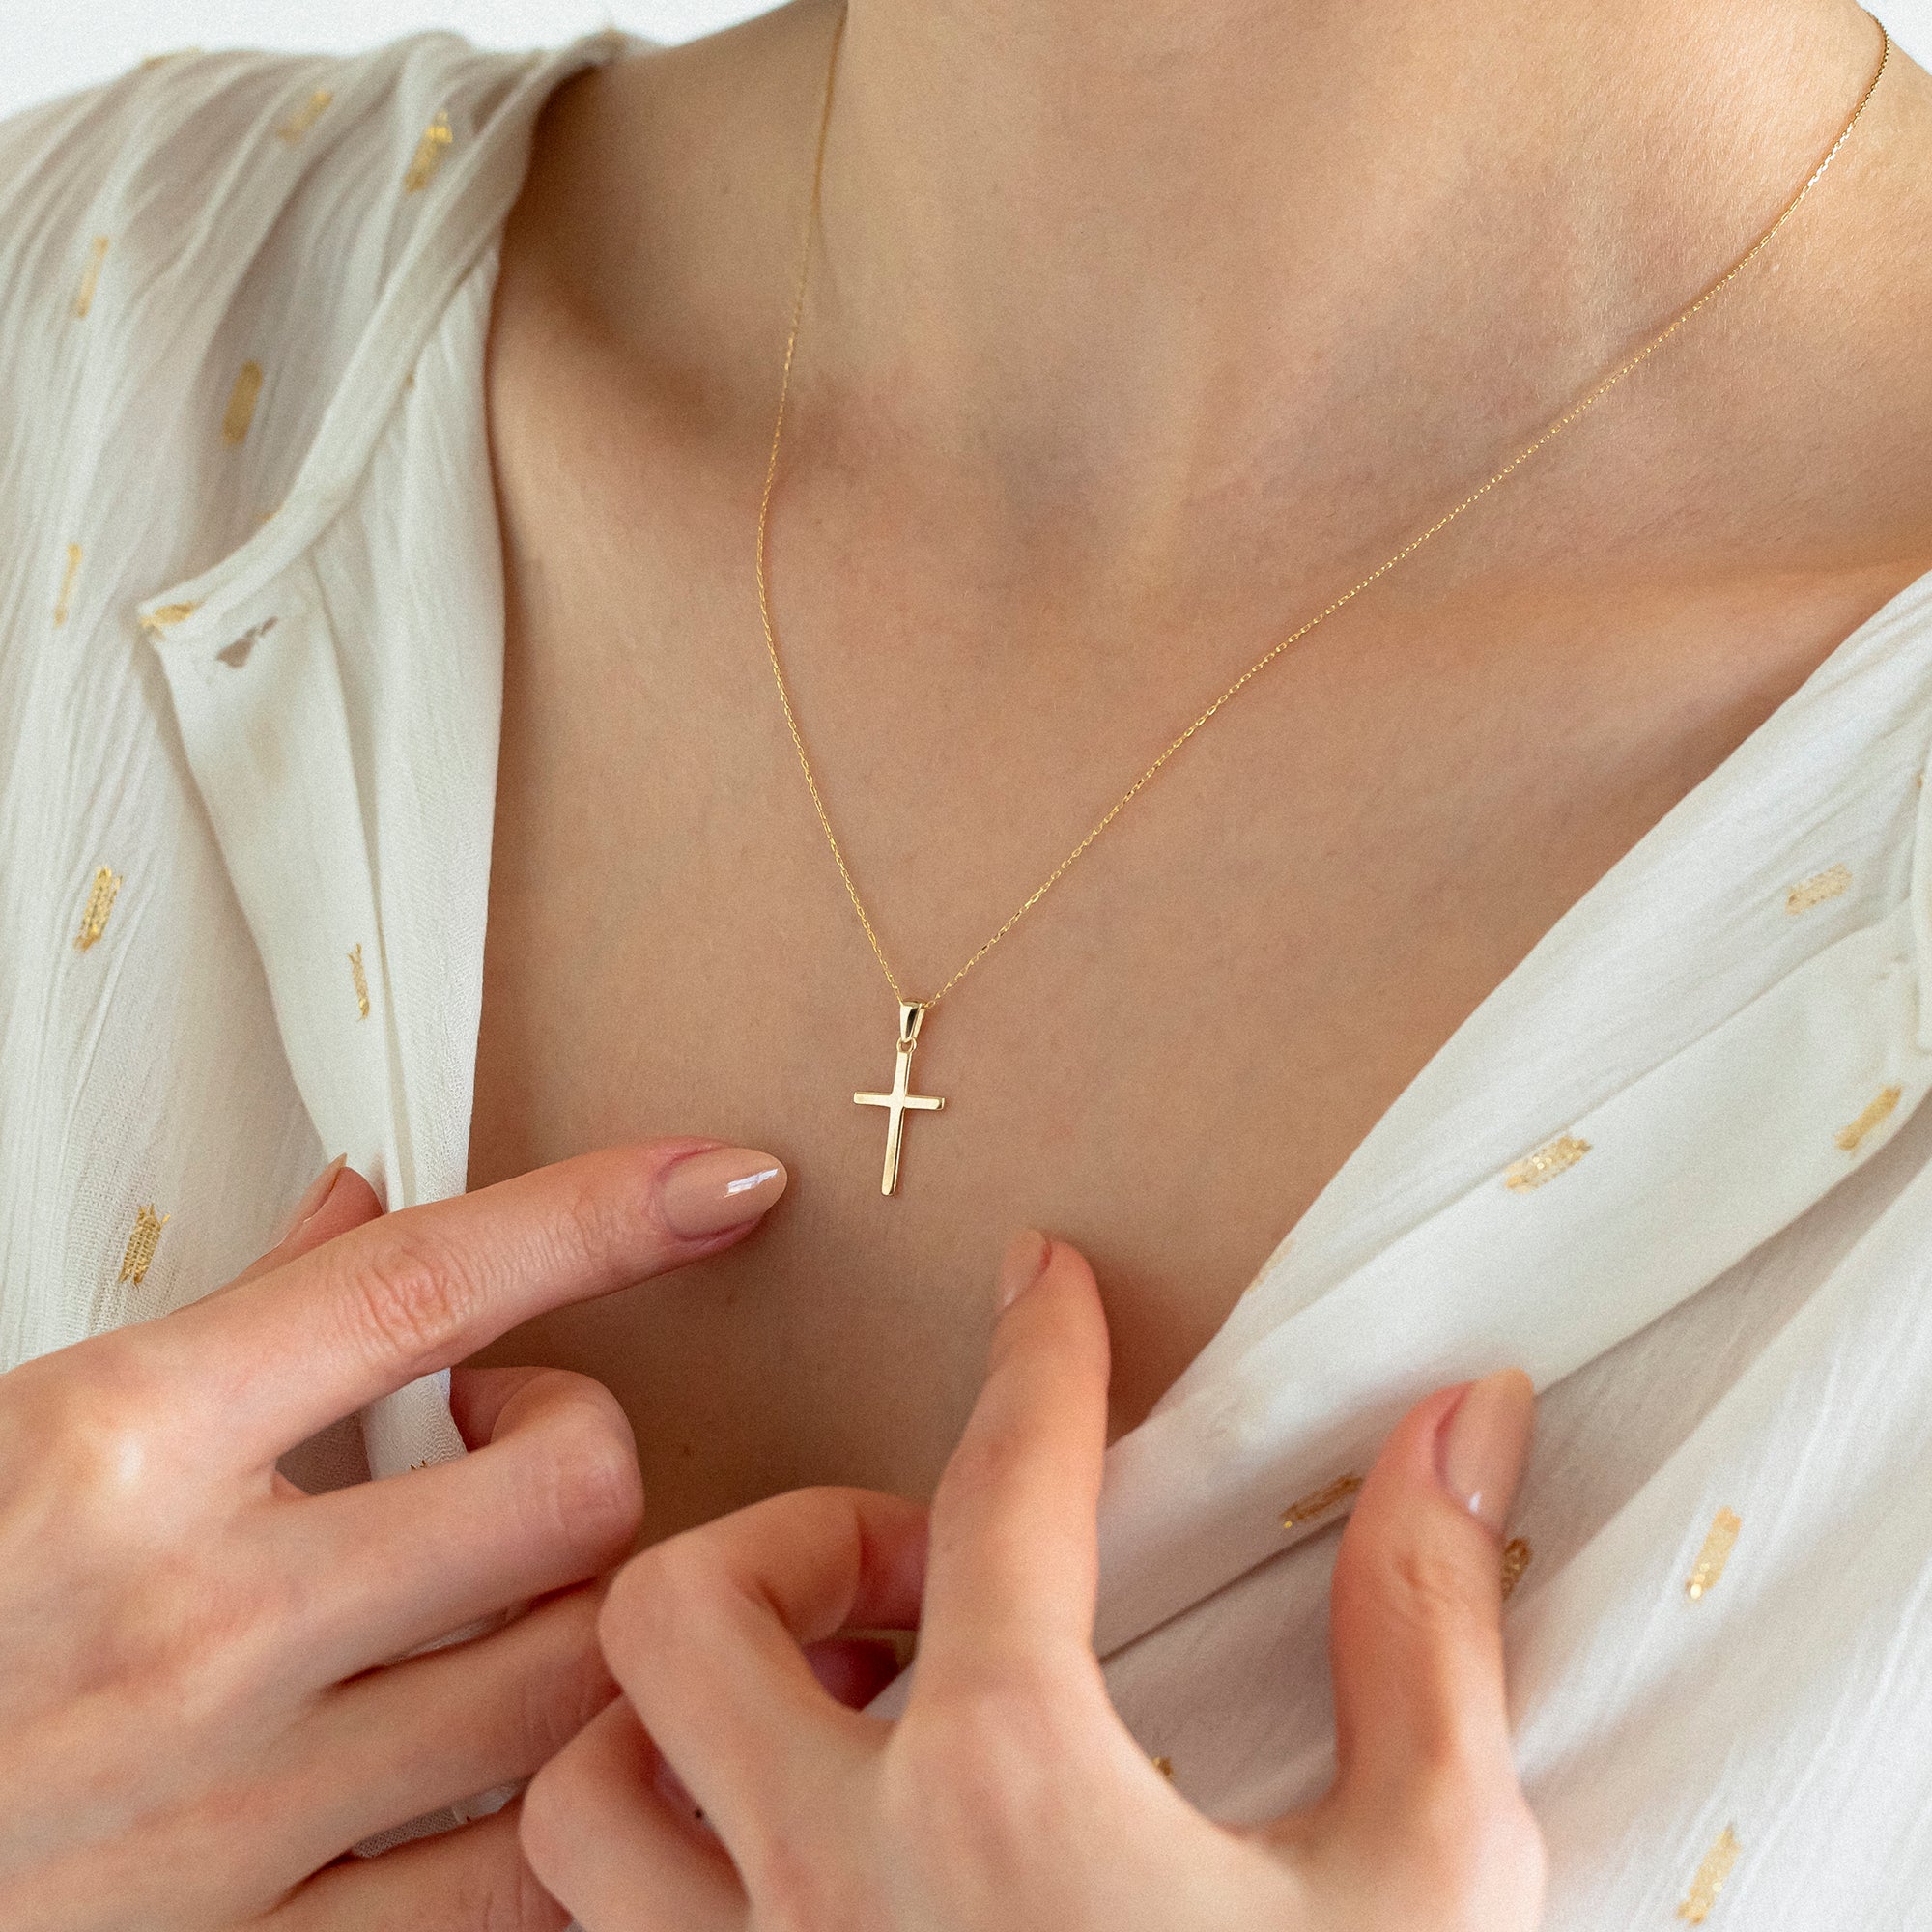 Christian Necklace Stainless Steel | Stainless Steel Christian Jewelry -  Cross - Aliexpress